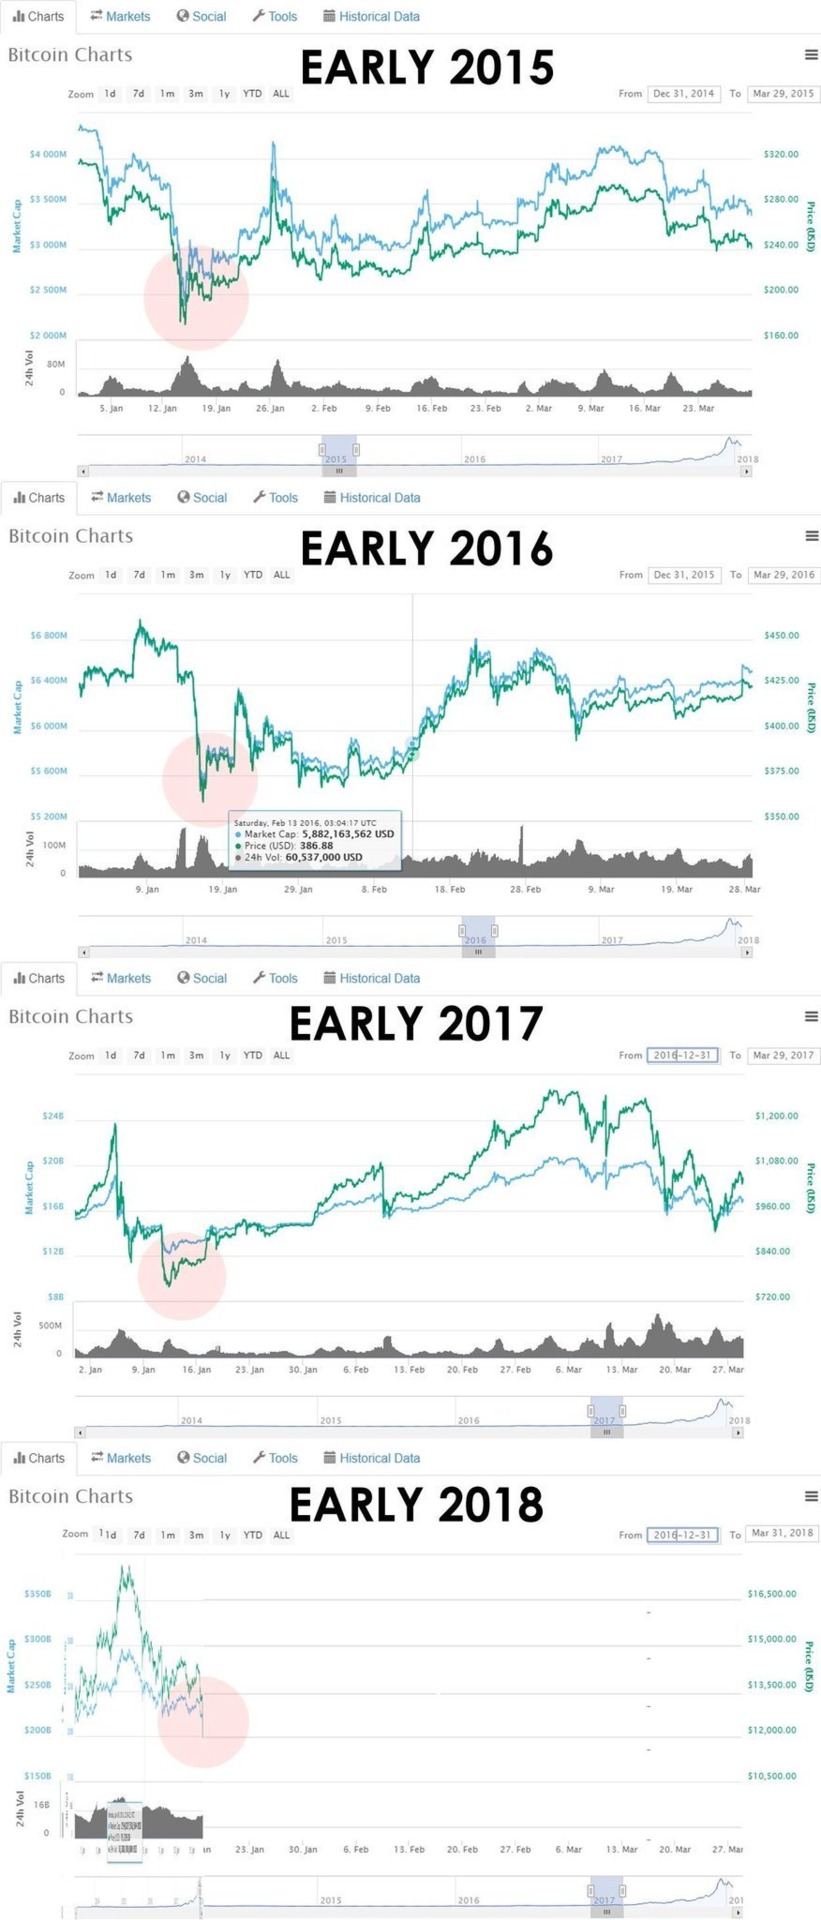 Not that past trends guarantee anything, but worth noting the pattern. 